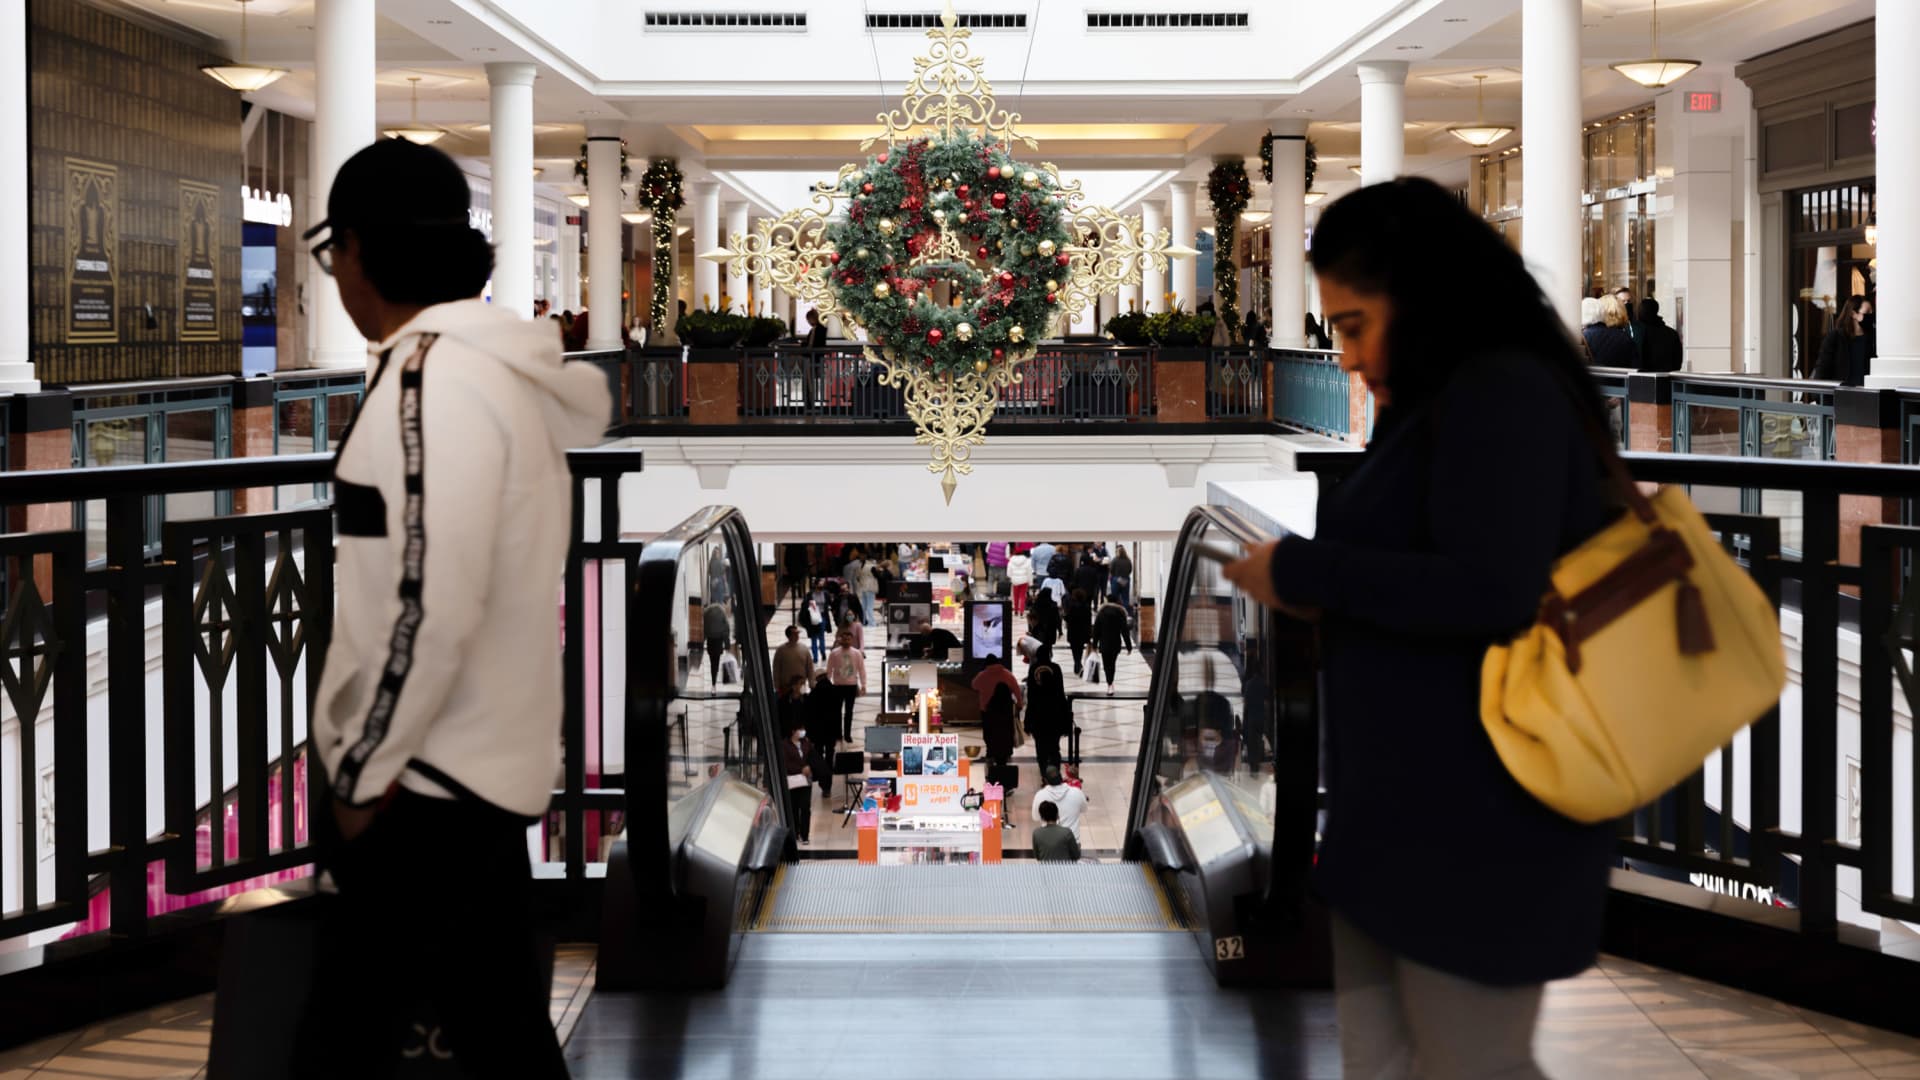 Shoppers at the King of Prussia mall in King of Prussia, Pennsylvania, on Saturday, Dec. 4, 2021.